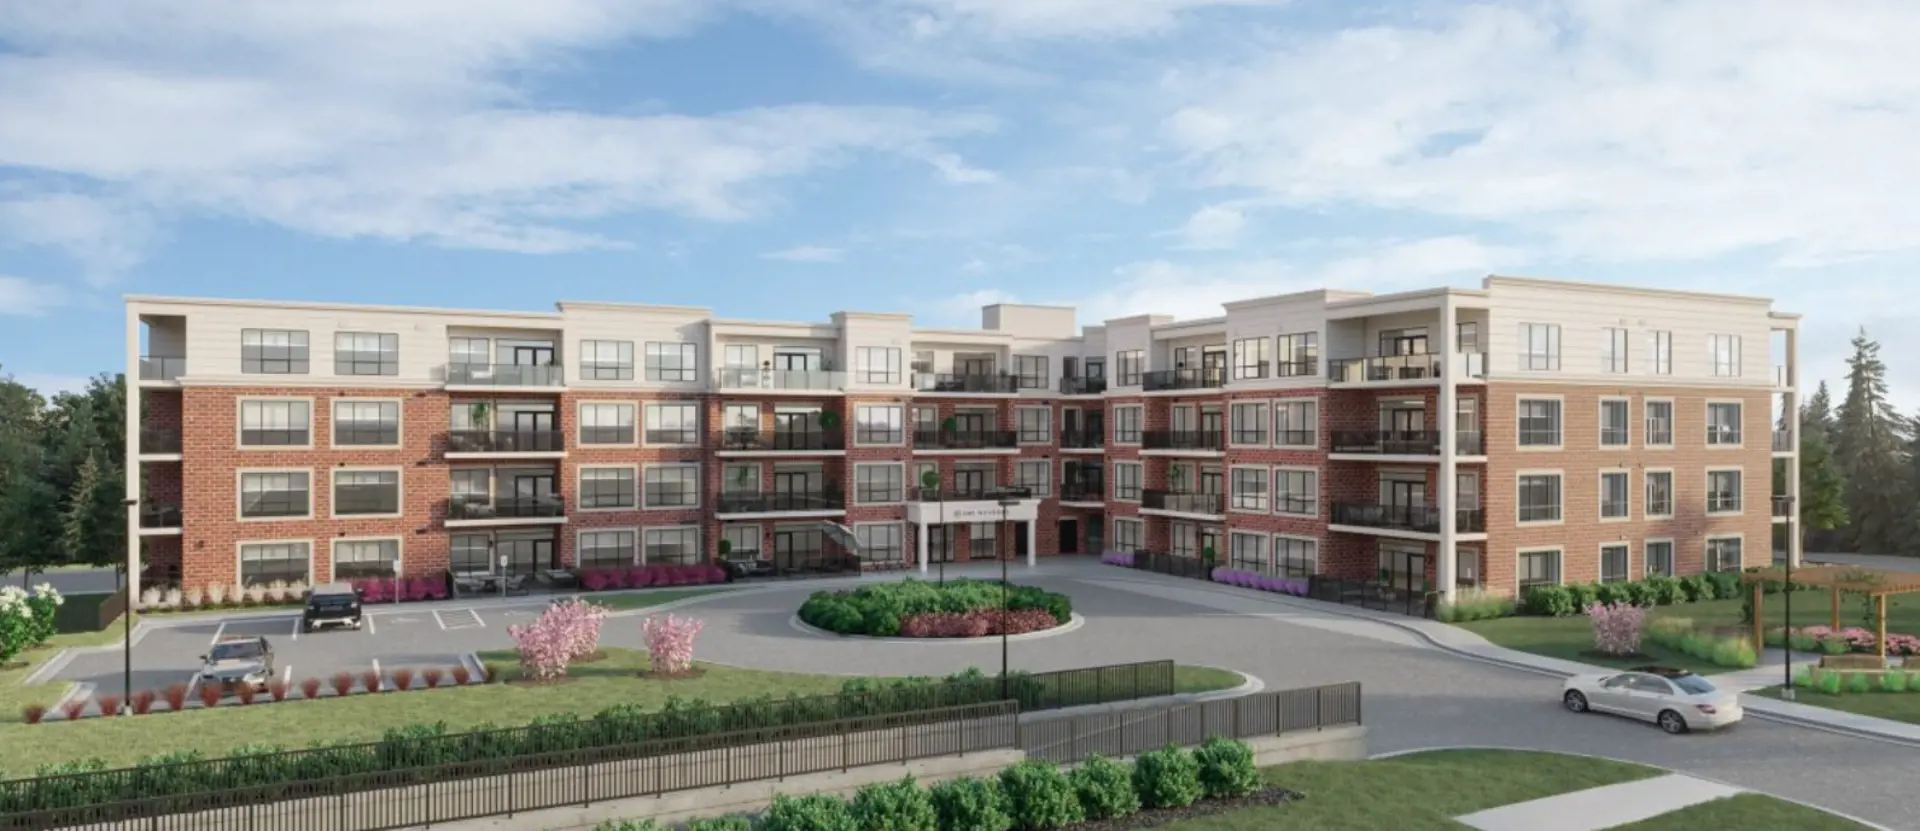 The Westdel Condos located at 1478 Westdel Bourne, London, ON image